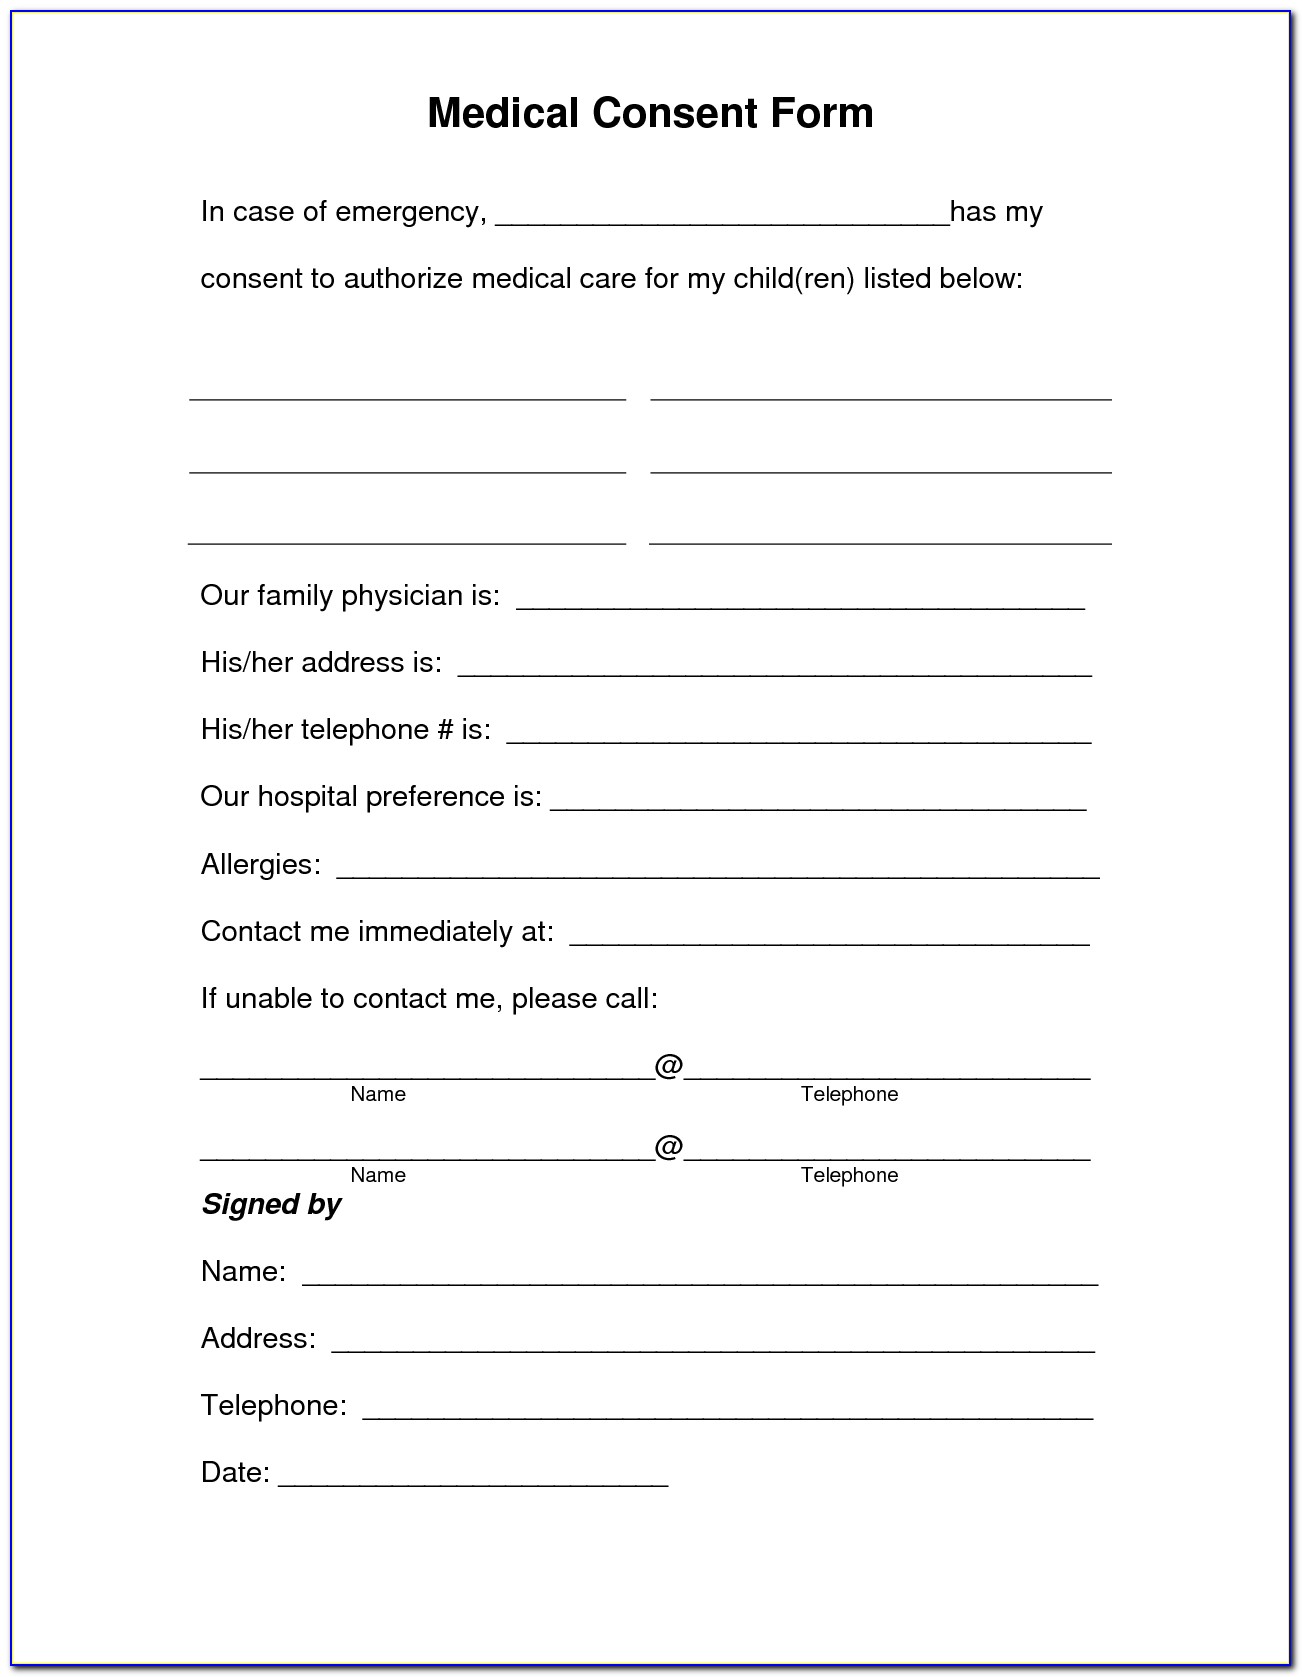 Medical Consent Form For Child Pdf